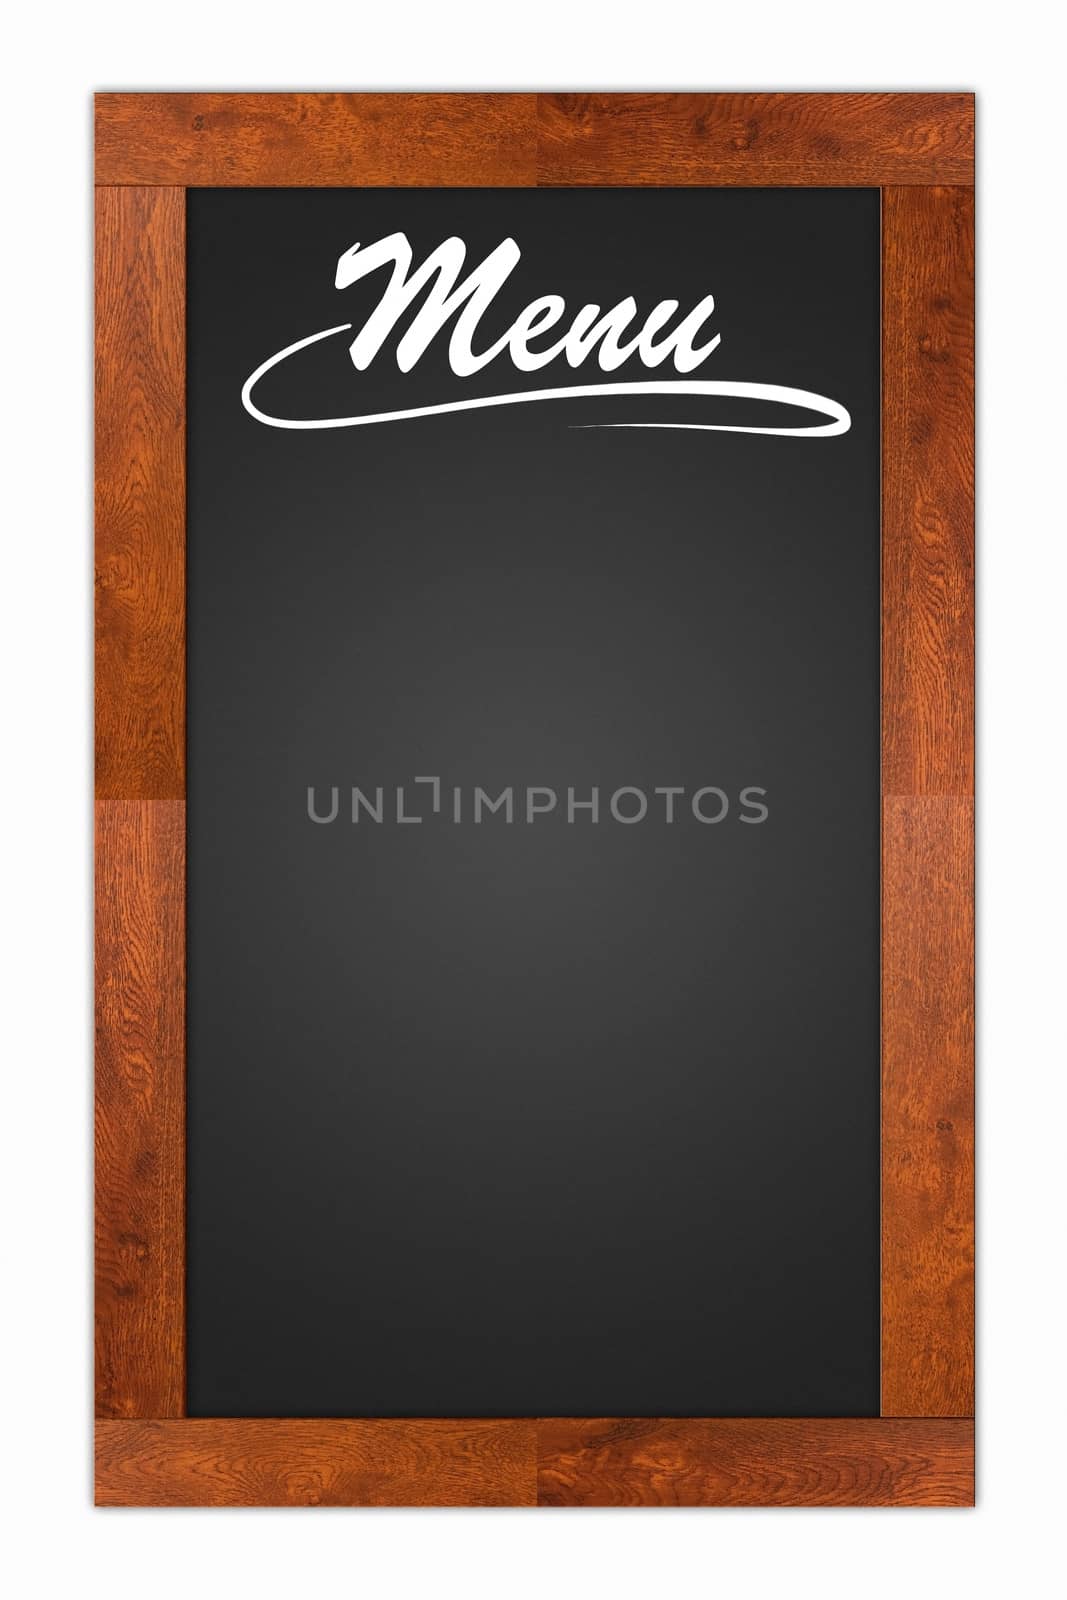 Menu written on a blank blackboard with wooden frame isolated on white background